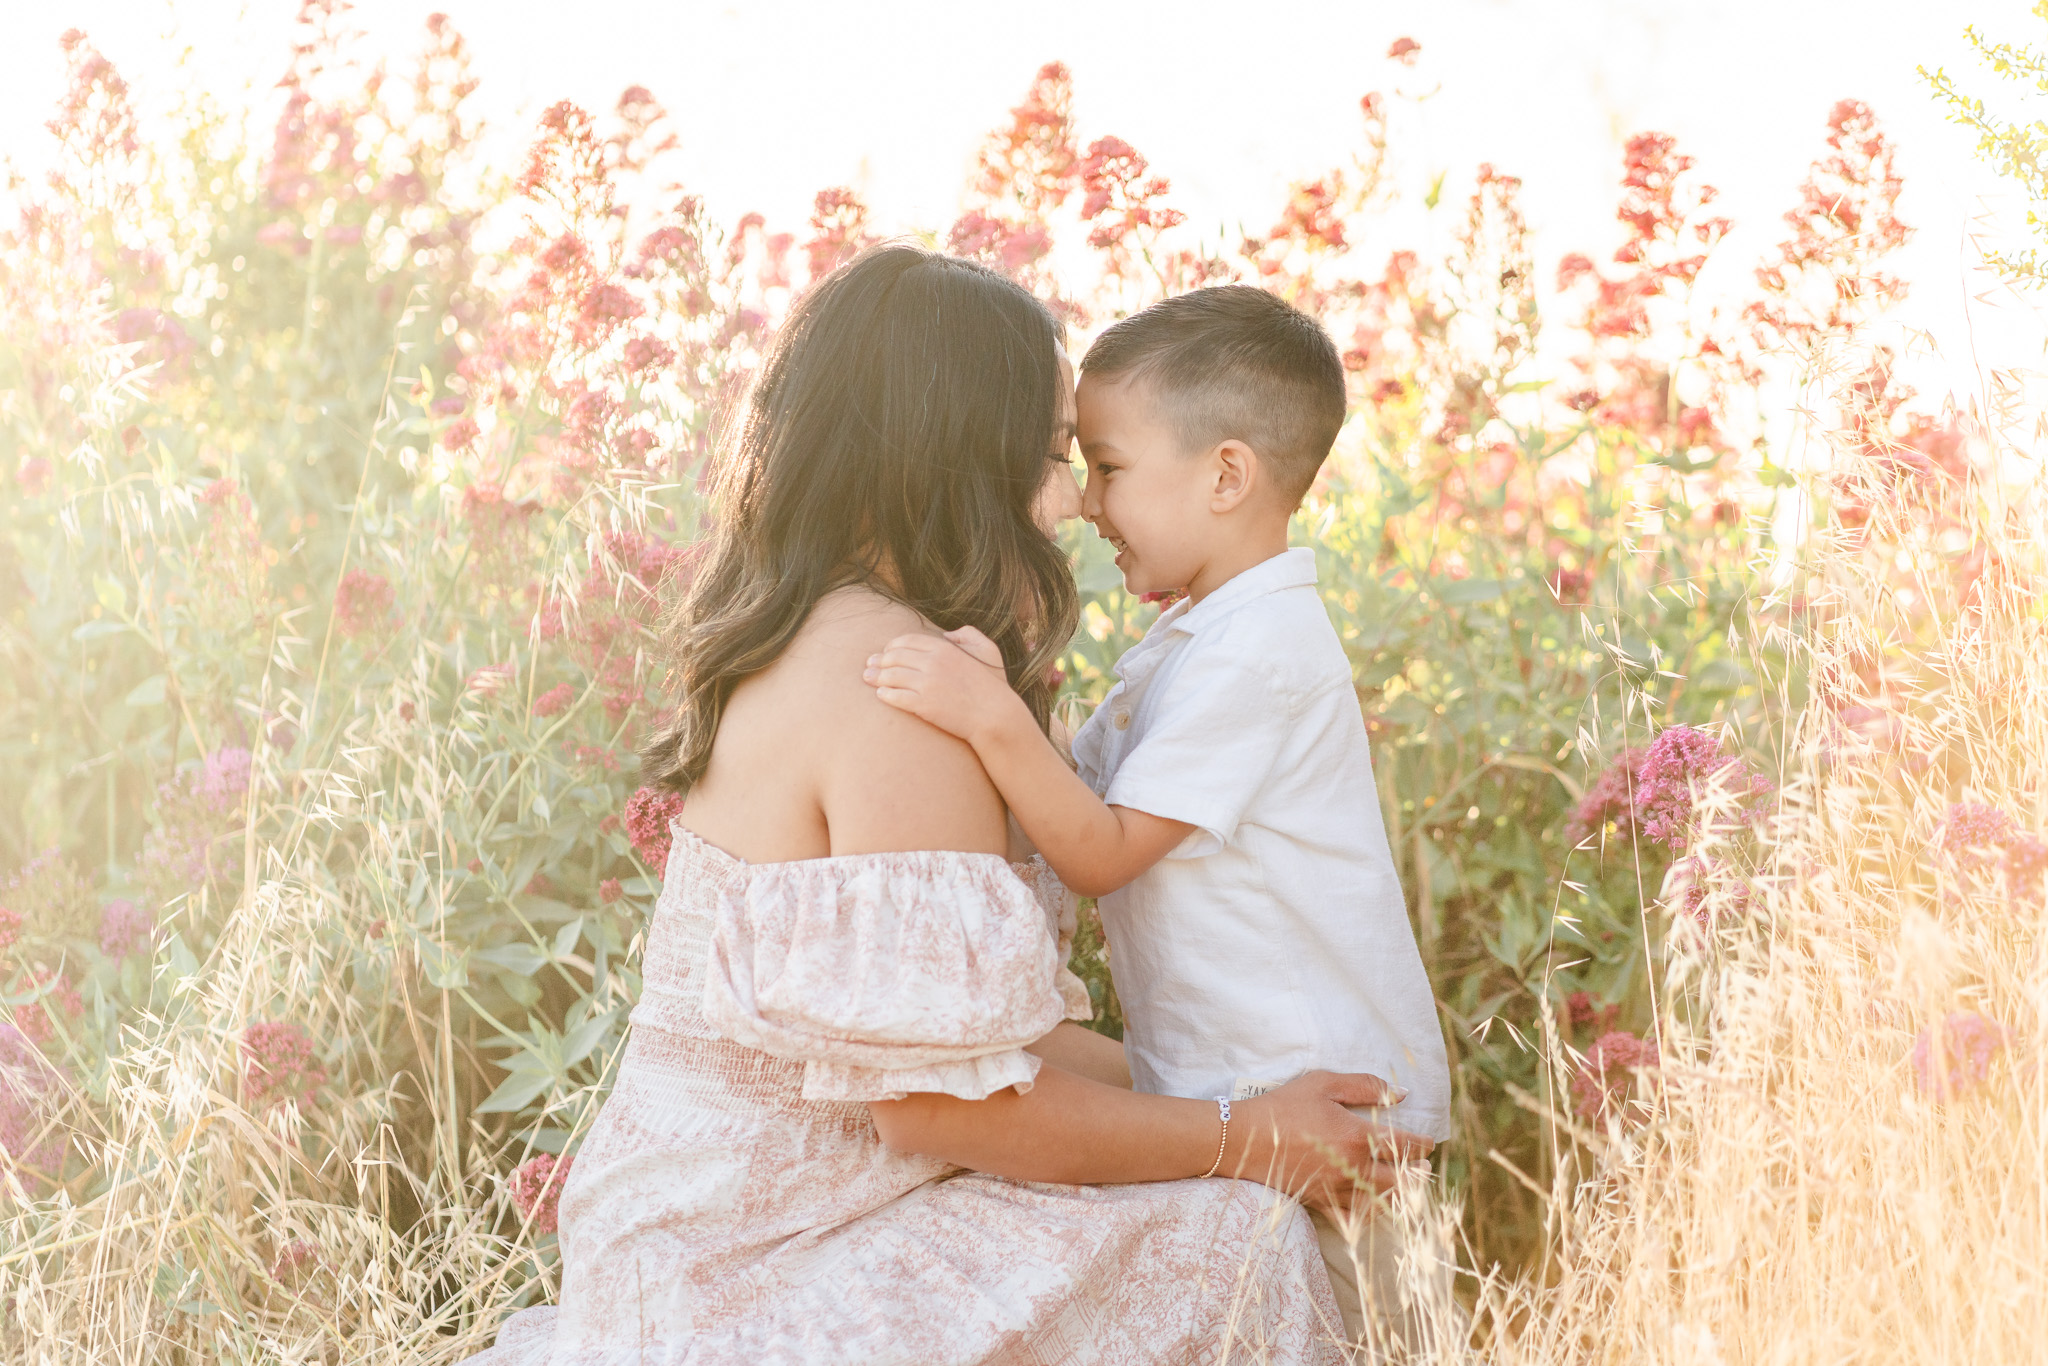 mom and young son touching noses in a field of flowers in the bay area